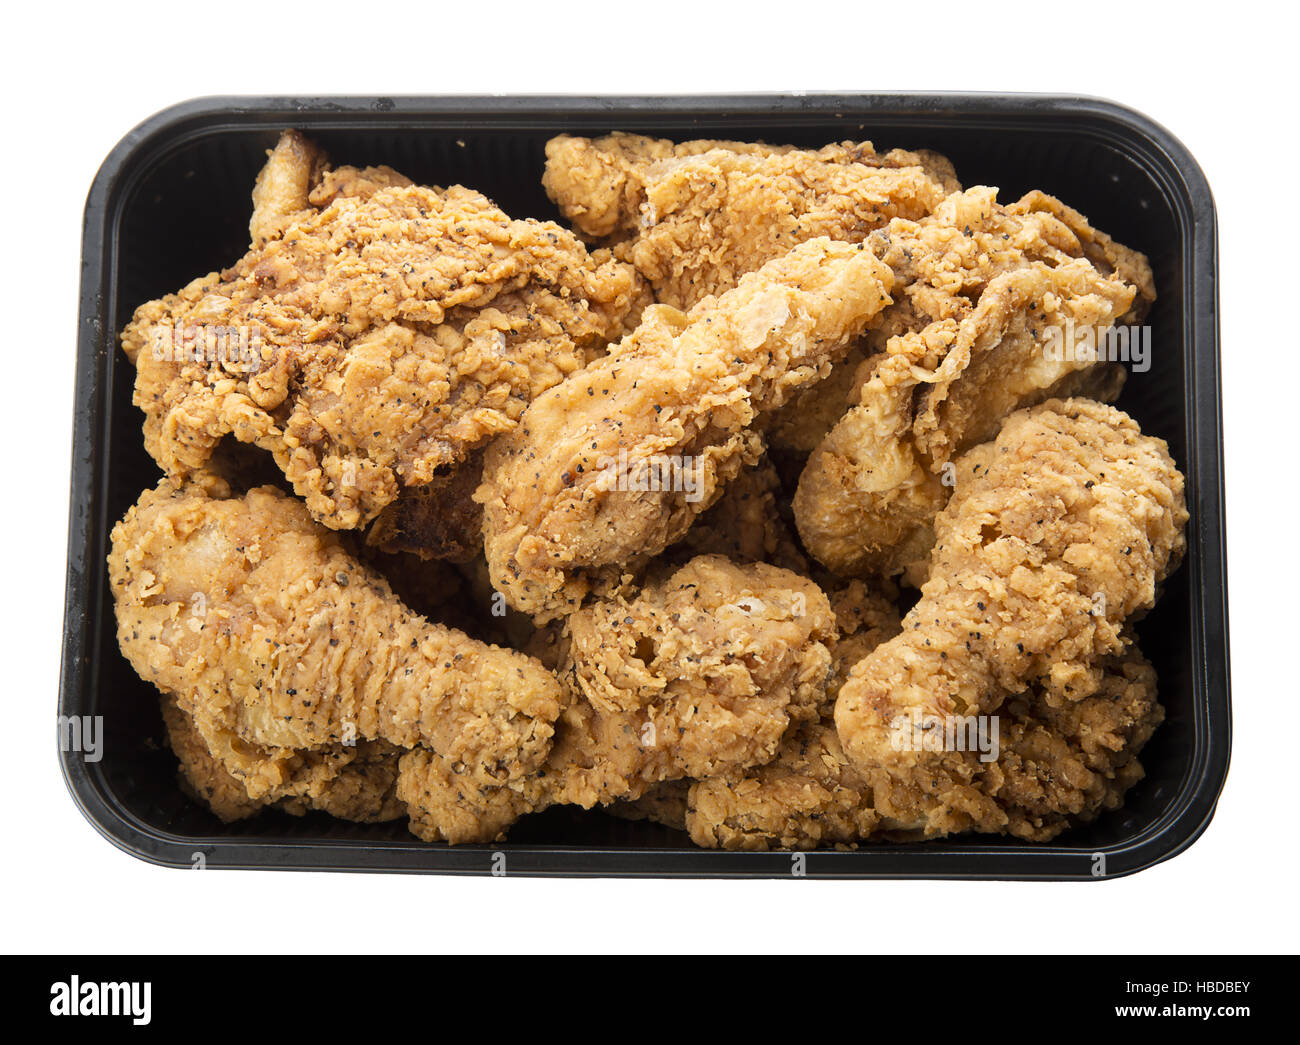 fried chicken in container Stock Photo